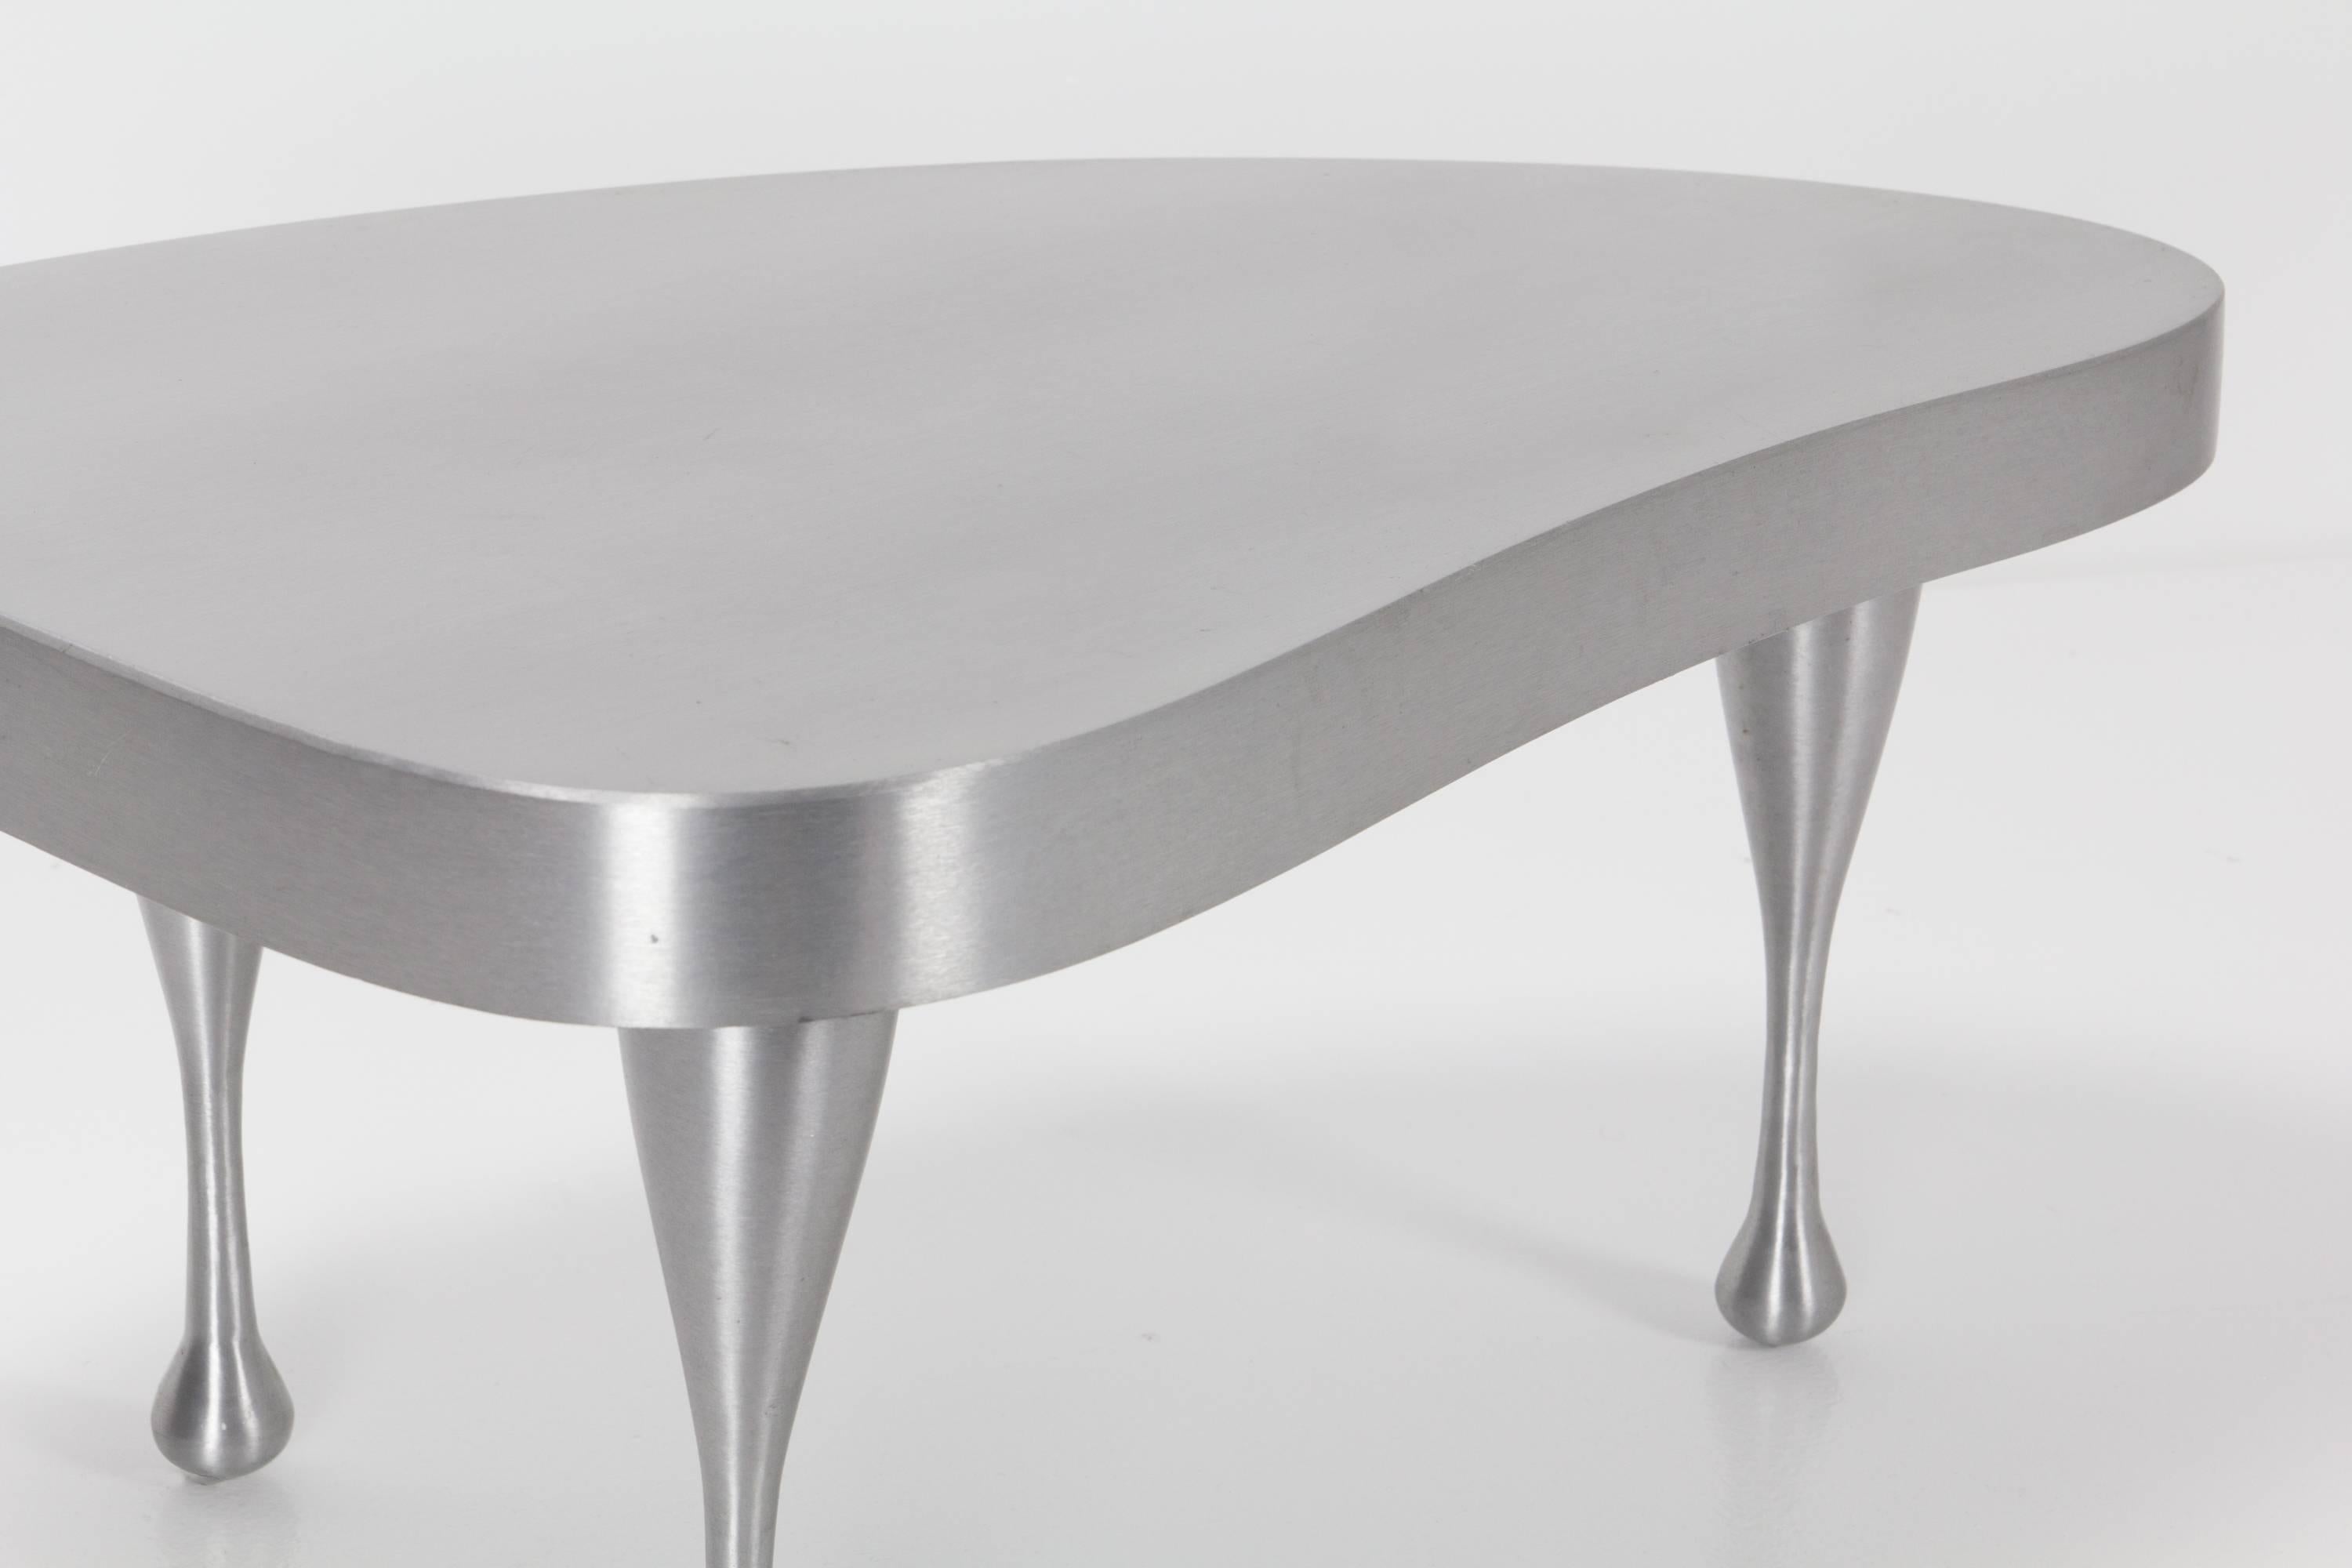 Palazetti re-edition of Frederick Kiesler's 1935 cast aluminium biomorphic nesting tables. This example is a single standalone table or may be used to complete a pair.